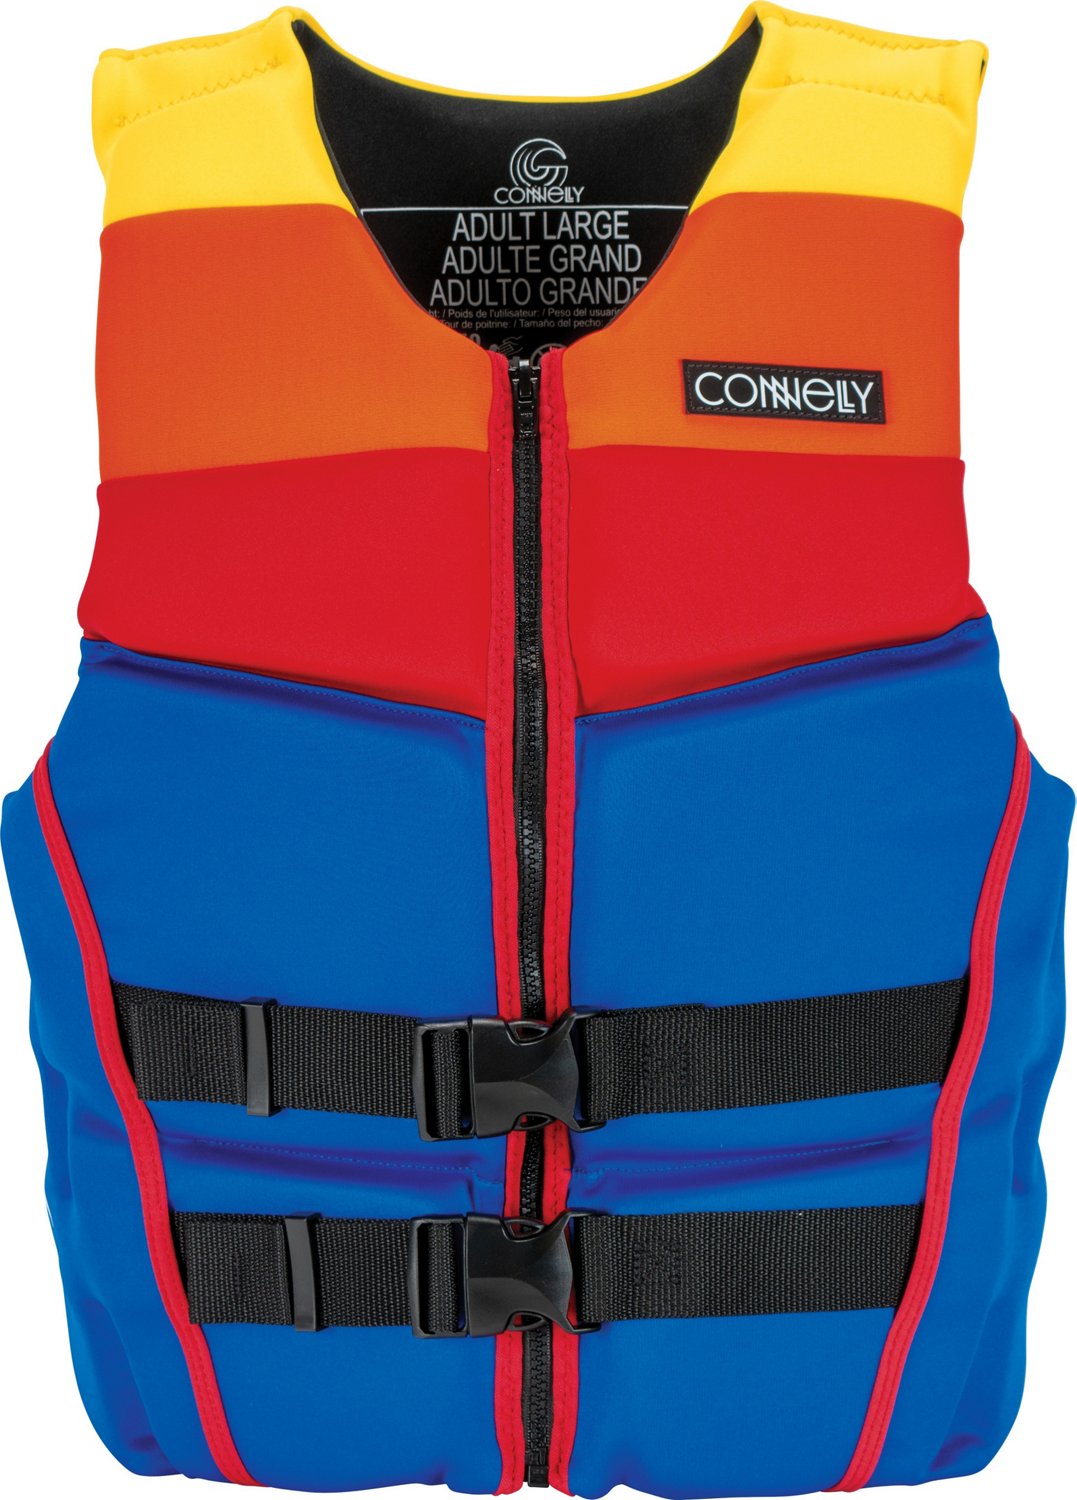 Details about   Life Jackets Watersports Floatation Vest Adults Children Beach Life Jackets